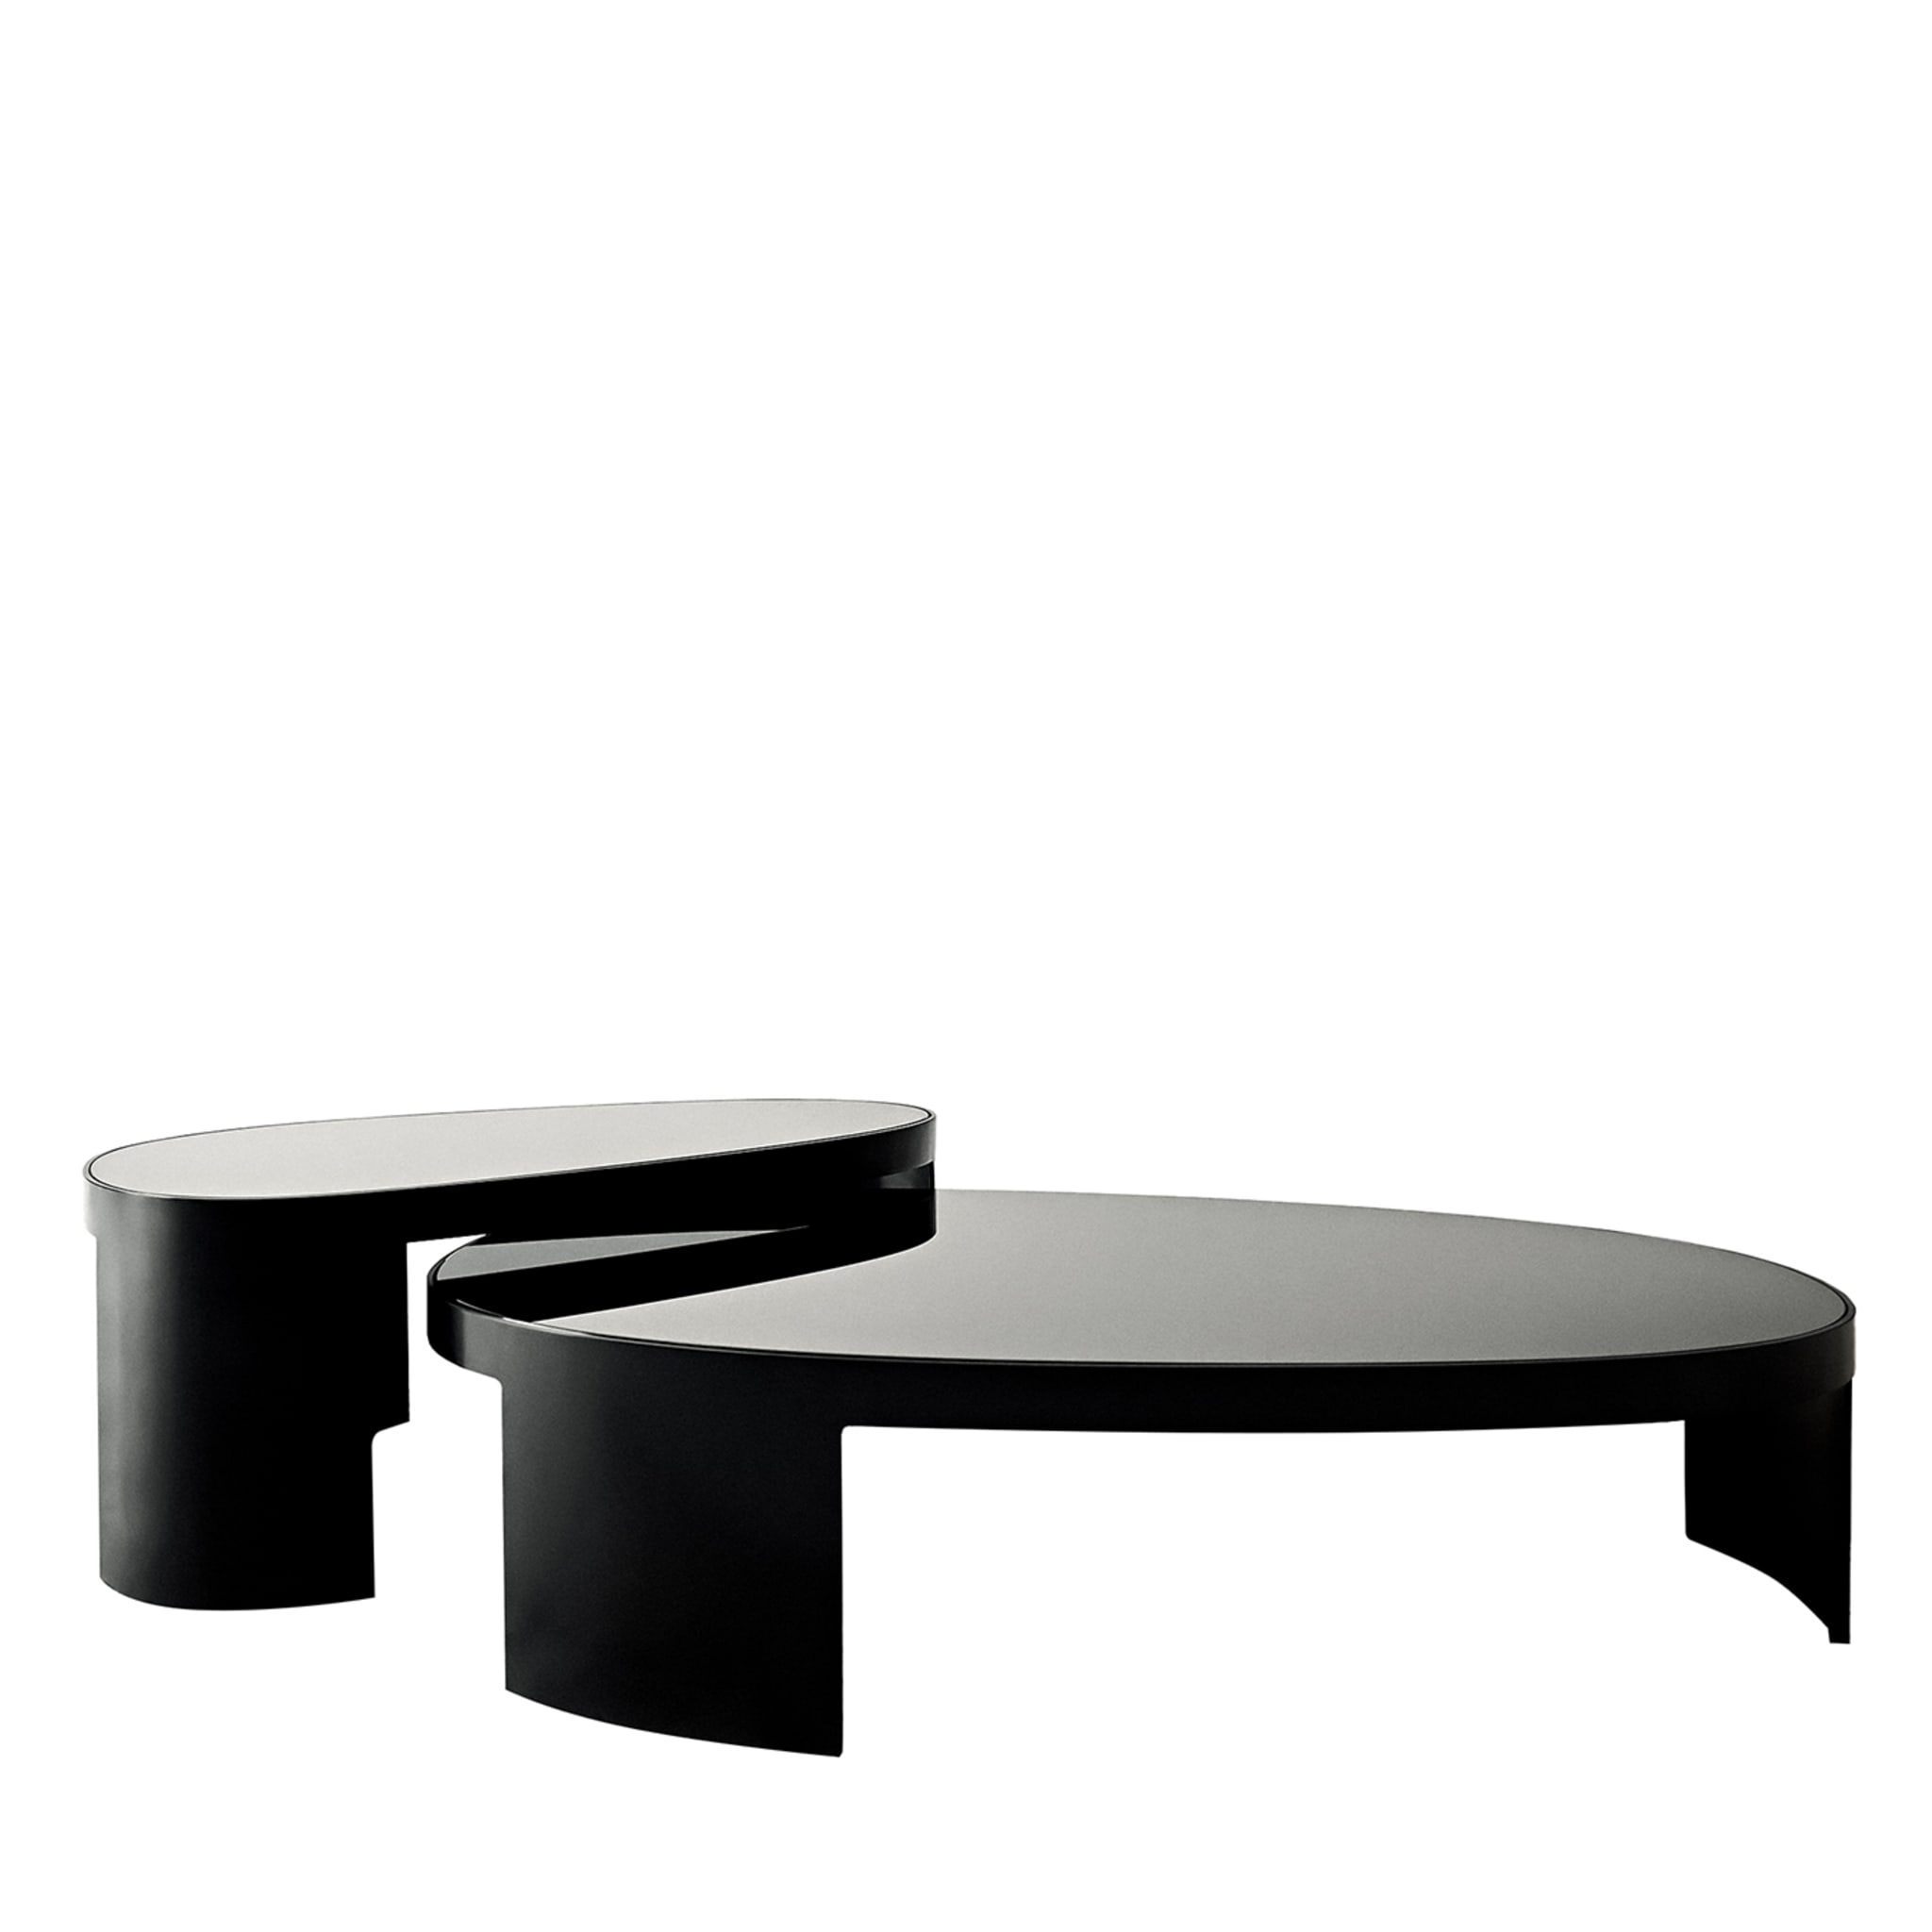 Kyoto Set of 2 Black Coffee Tables by Ludovica + Roberto Palomba - Main view